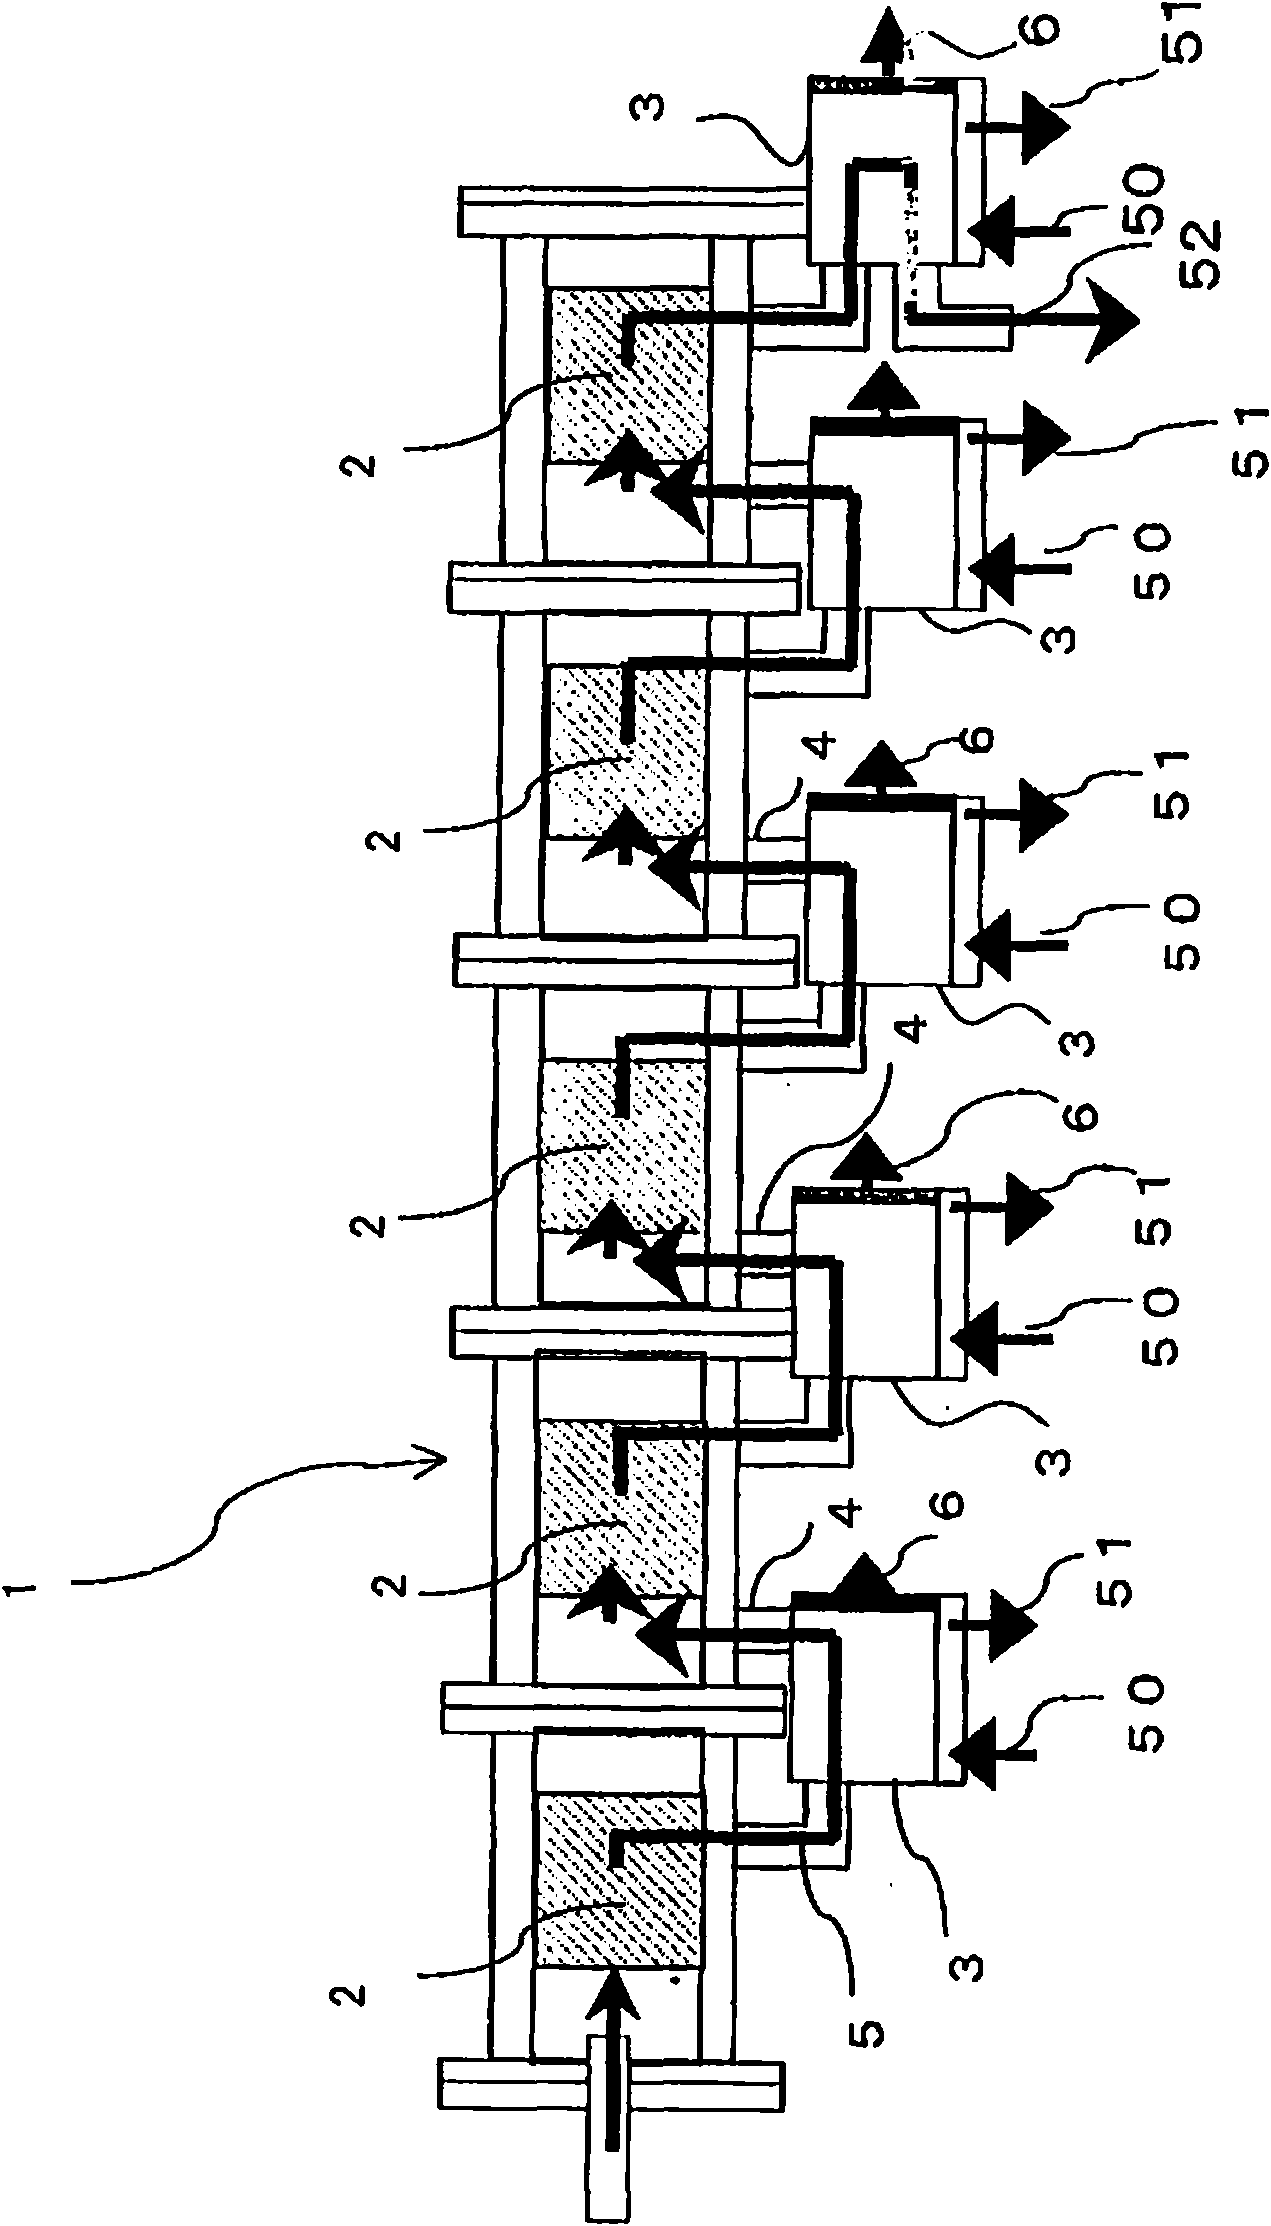 Apparatus and process for production of liquid fuel from biomass